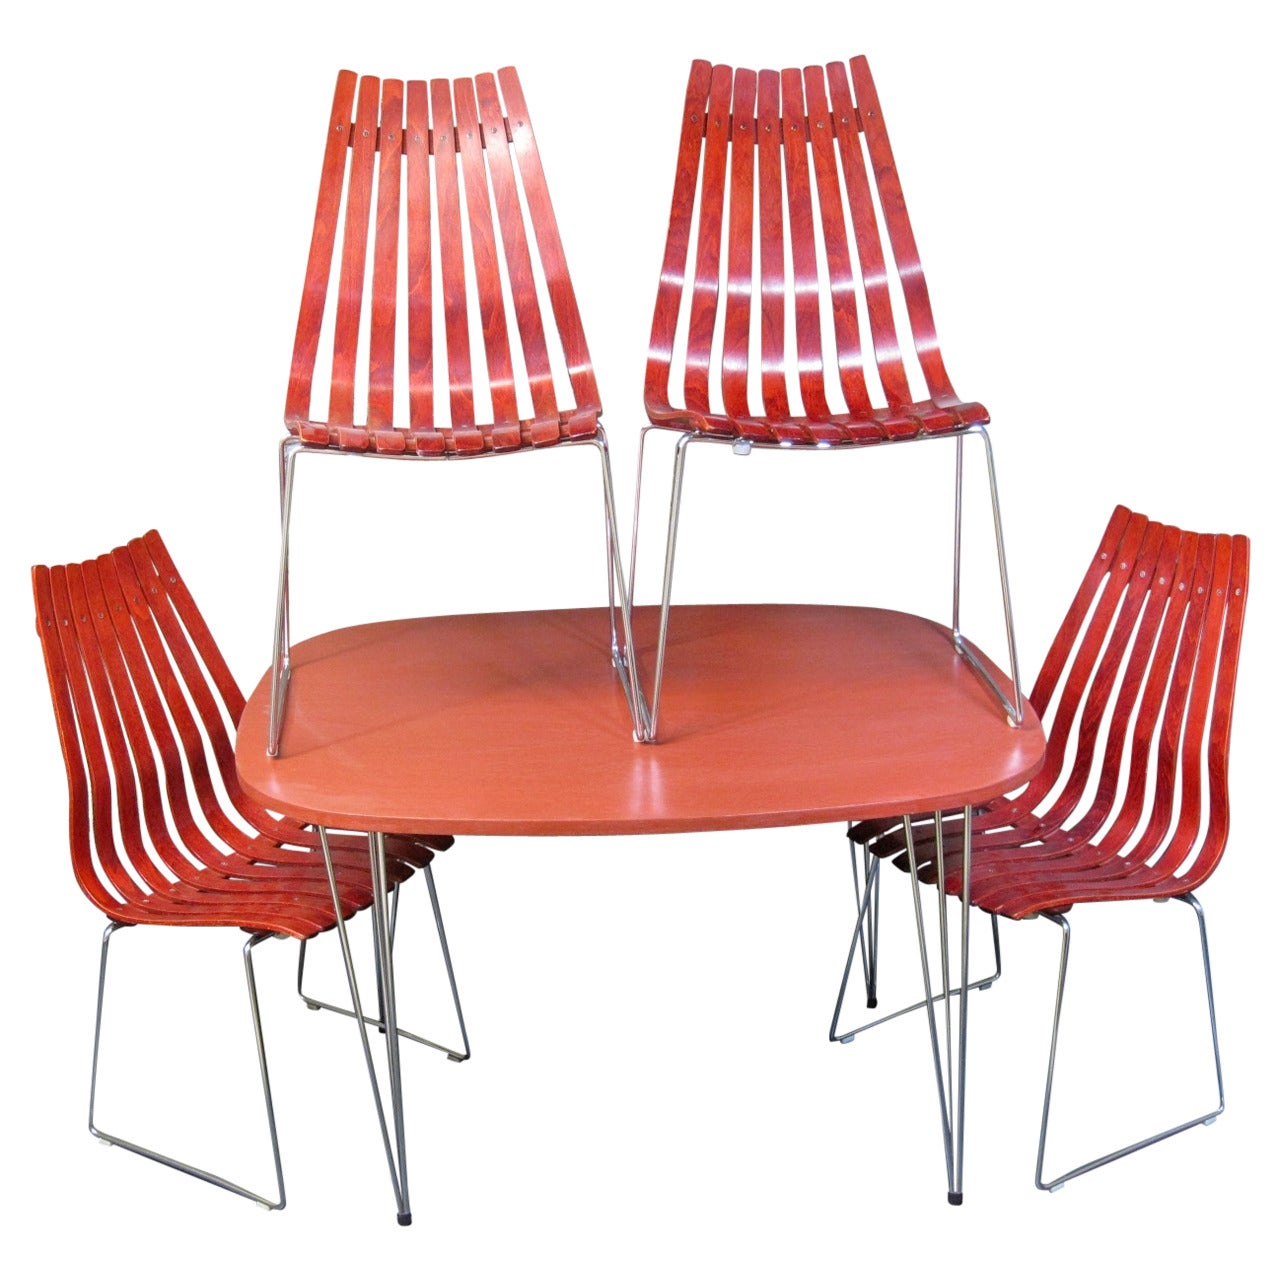 Hans Brattrud "Scandia" Dining Table and Chairs, Mid-Century Modern